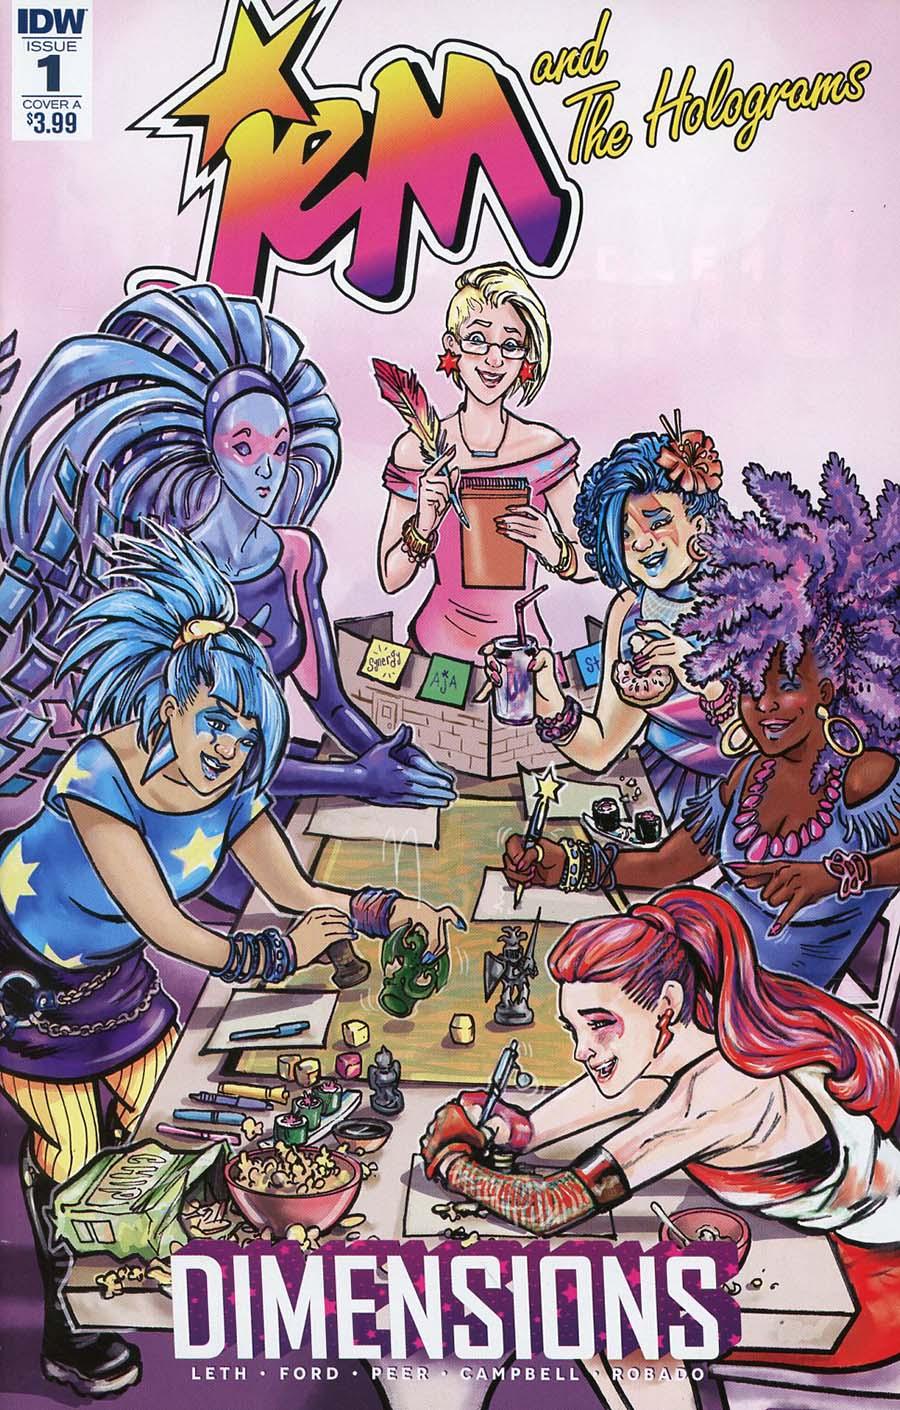 Jem And The Holograms Dimensions Vol. 1 #1